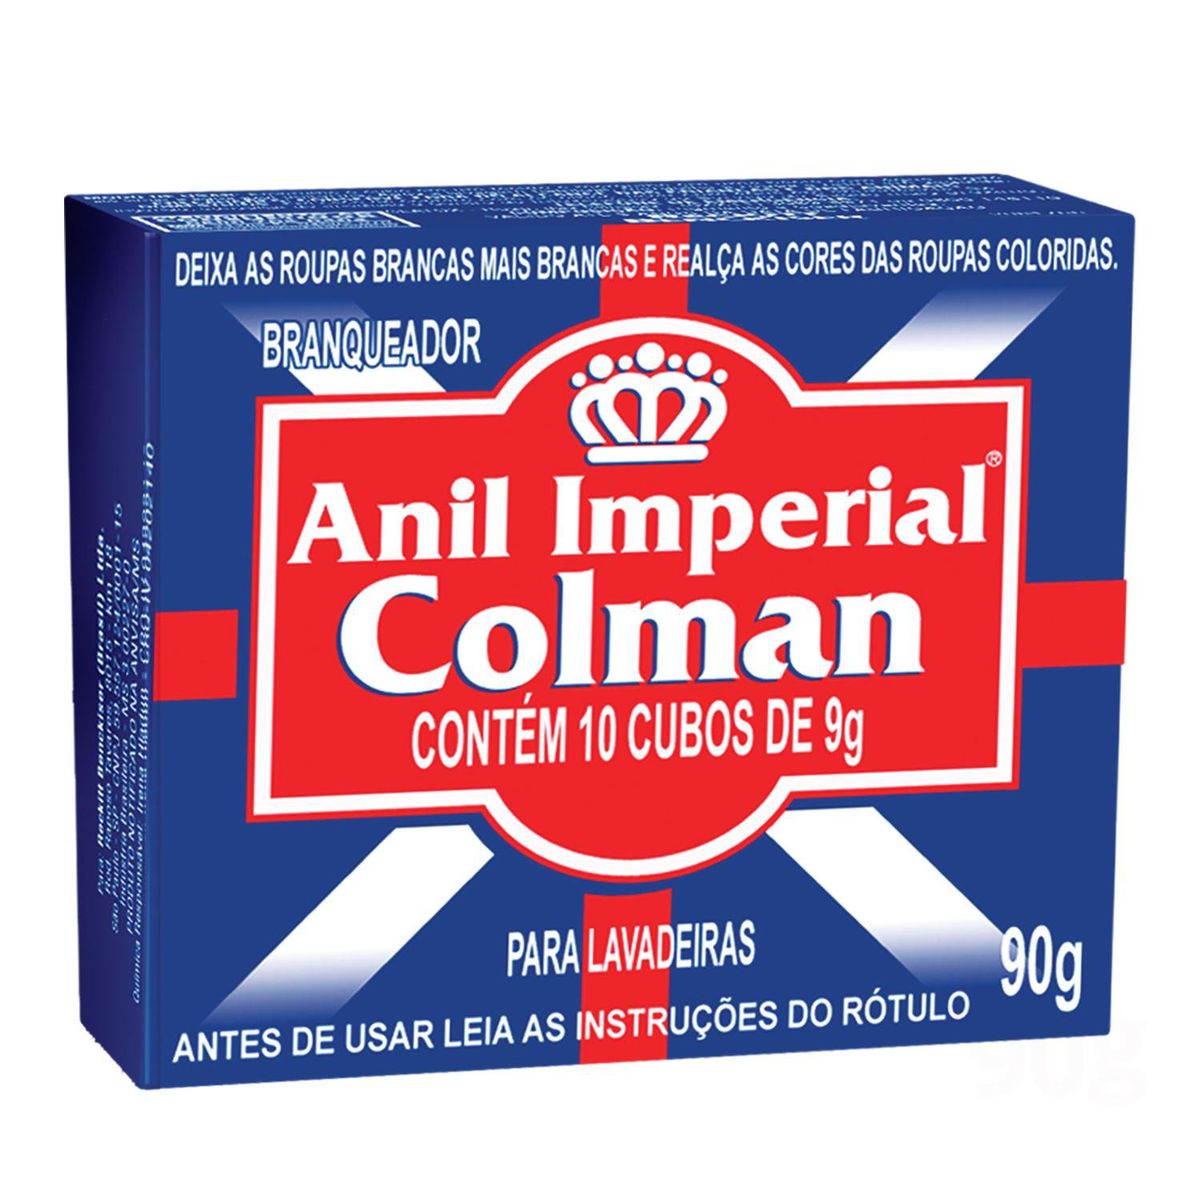 Branqueador Anil Imperial Colman 90g image number 0